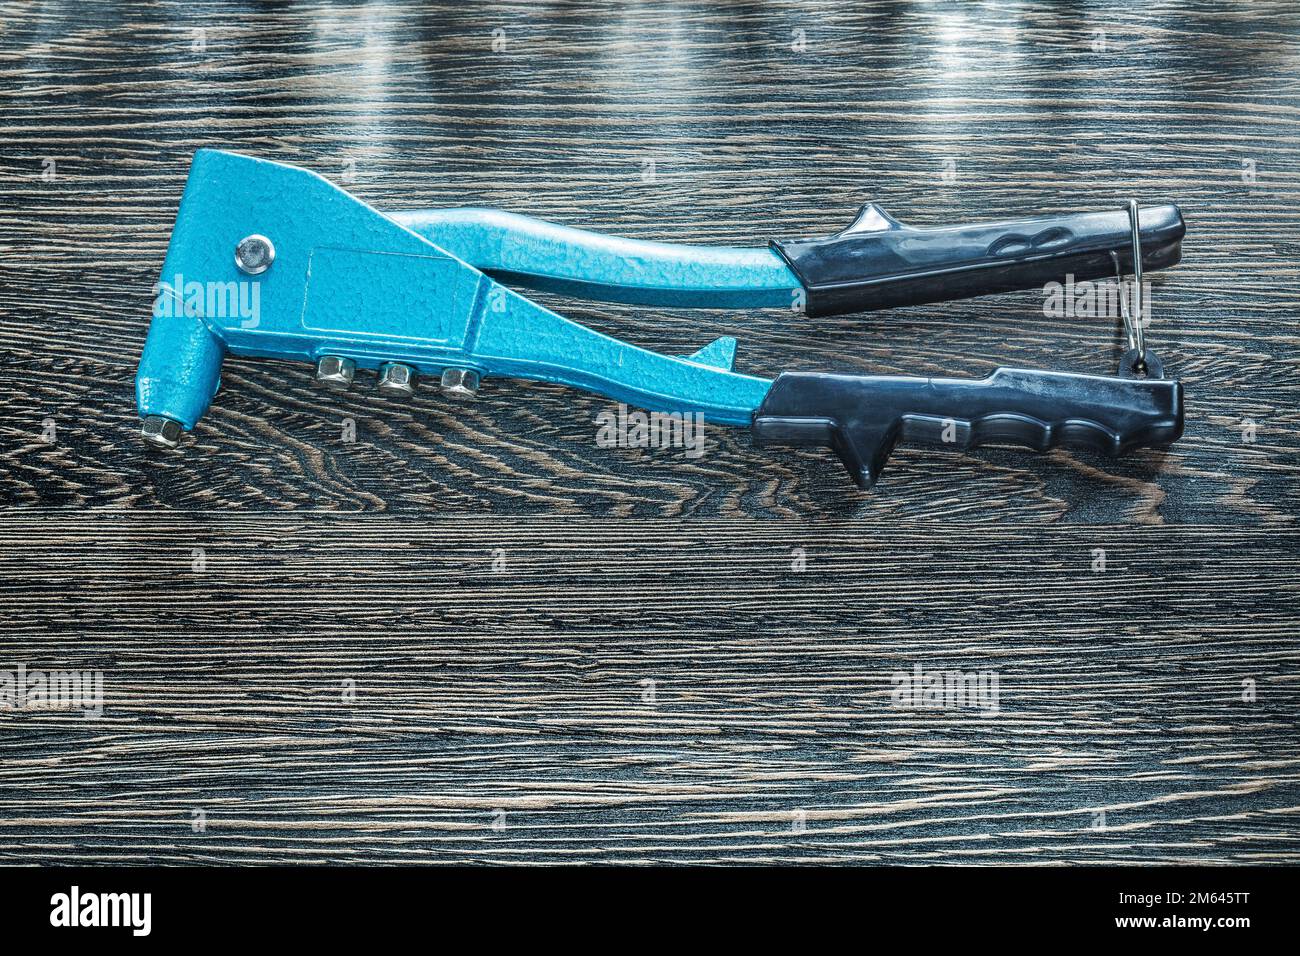 Riveting pliers on wooden board. Stock Photo